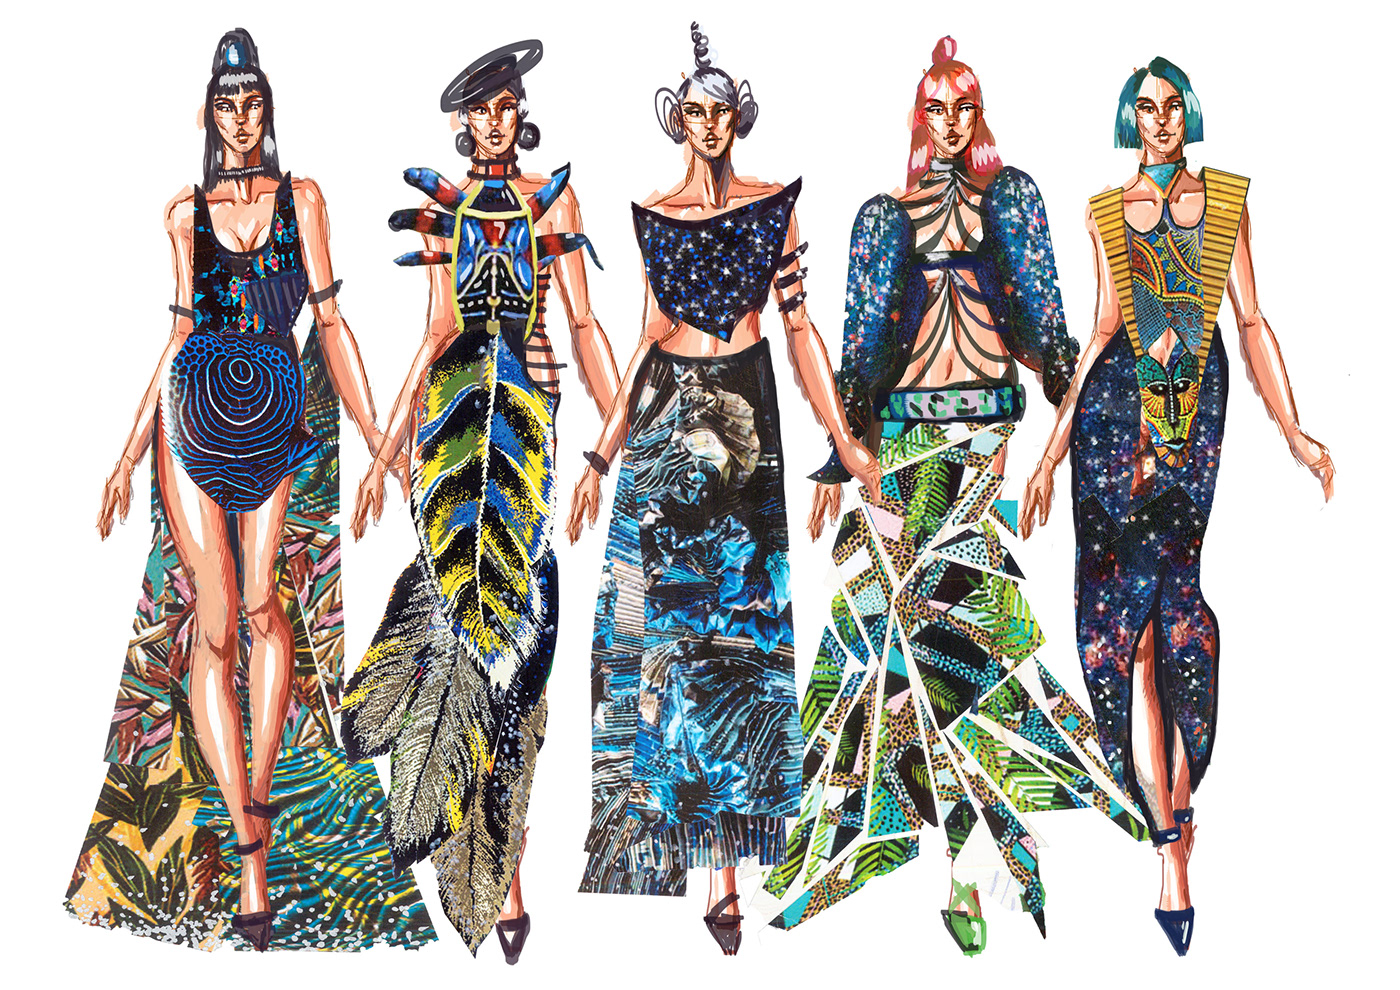 High fashion college inspired by nature and beuty